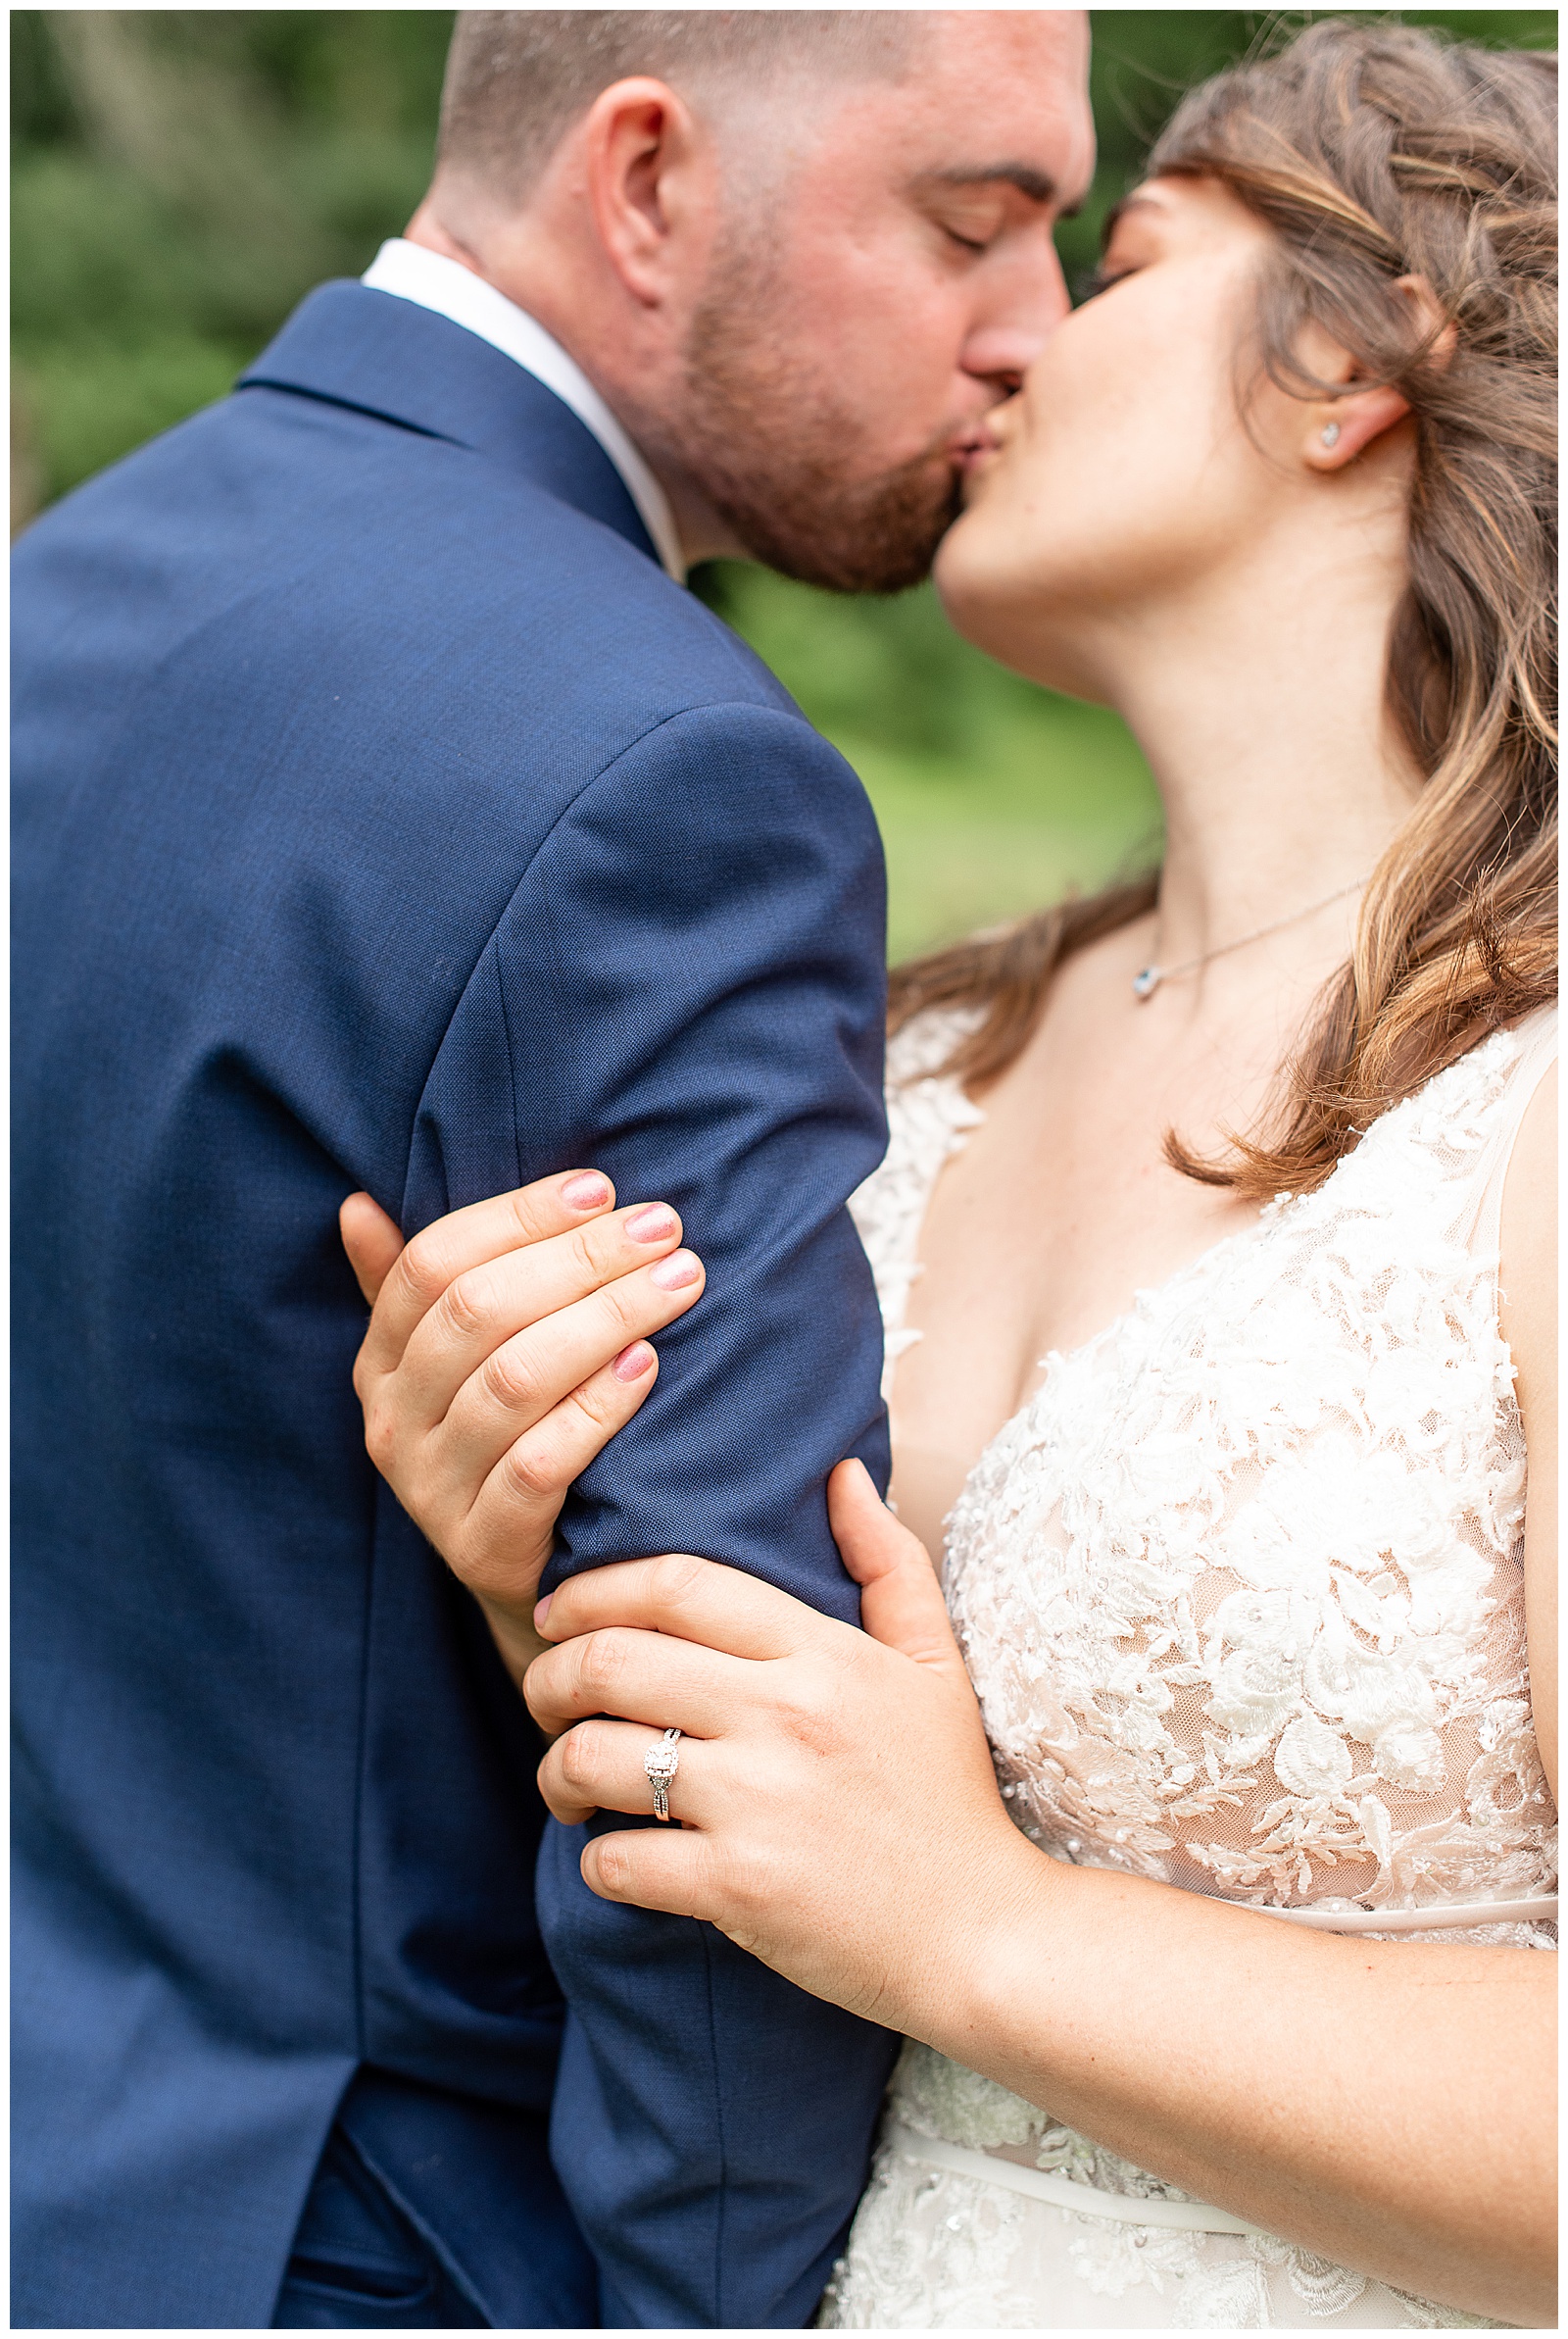 bride and groom kissing while bride holds onto his arm with wedding ring showing